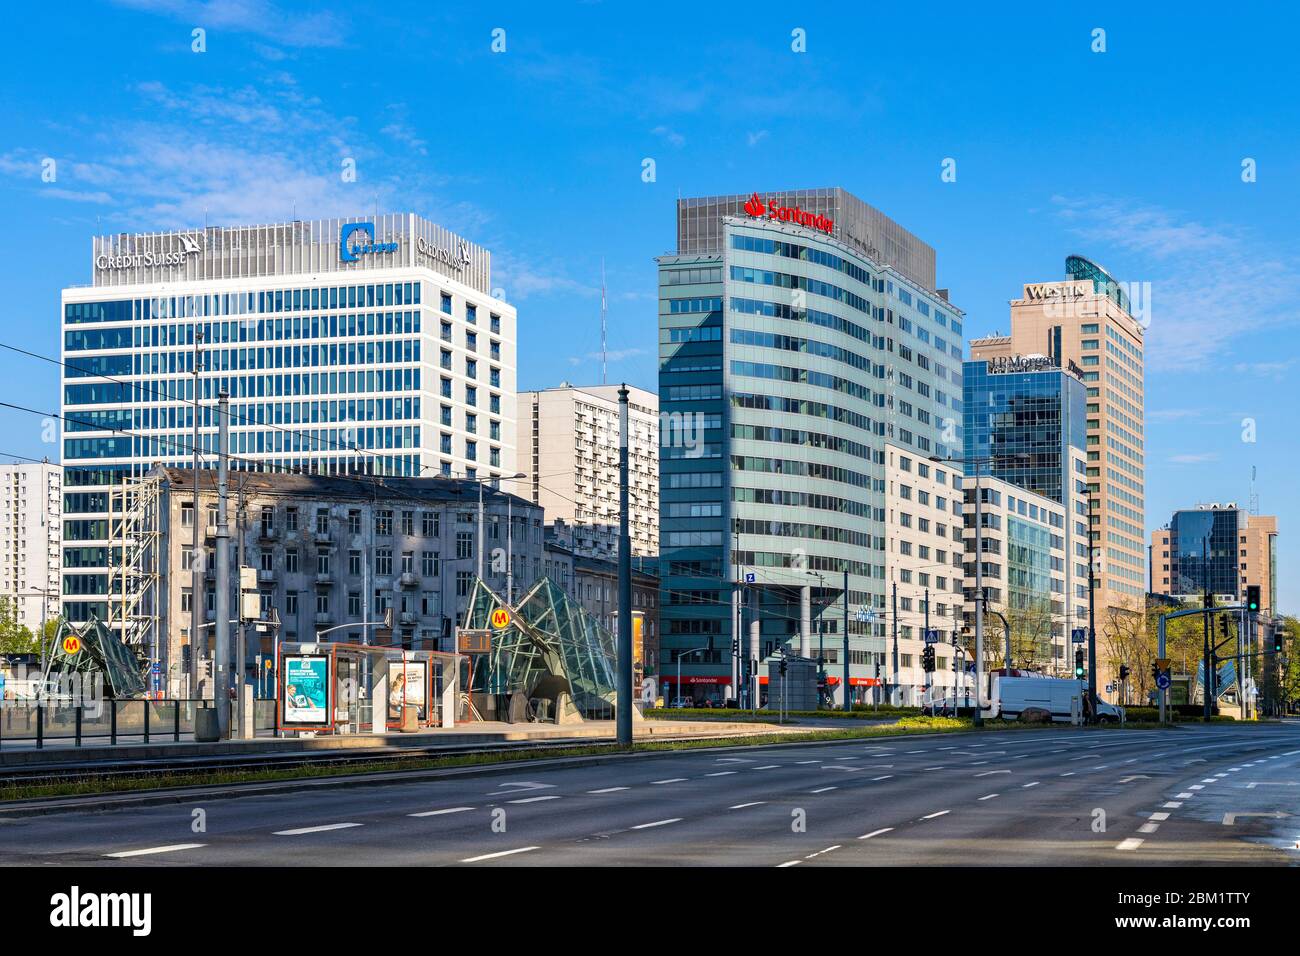 Warsaw, Mazovia / Poland - 2020/05/02: Panoramic view of Srodmiescie downtown district with Rondo ONZ roundabout and surrounding office buildings alon Stock Photo